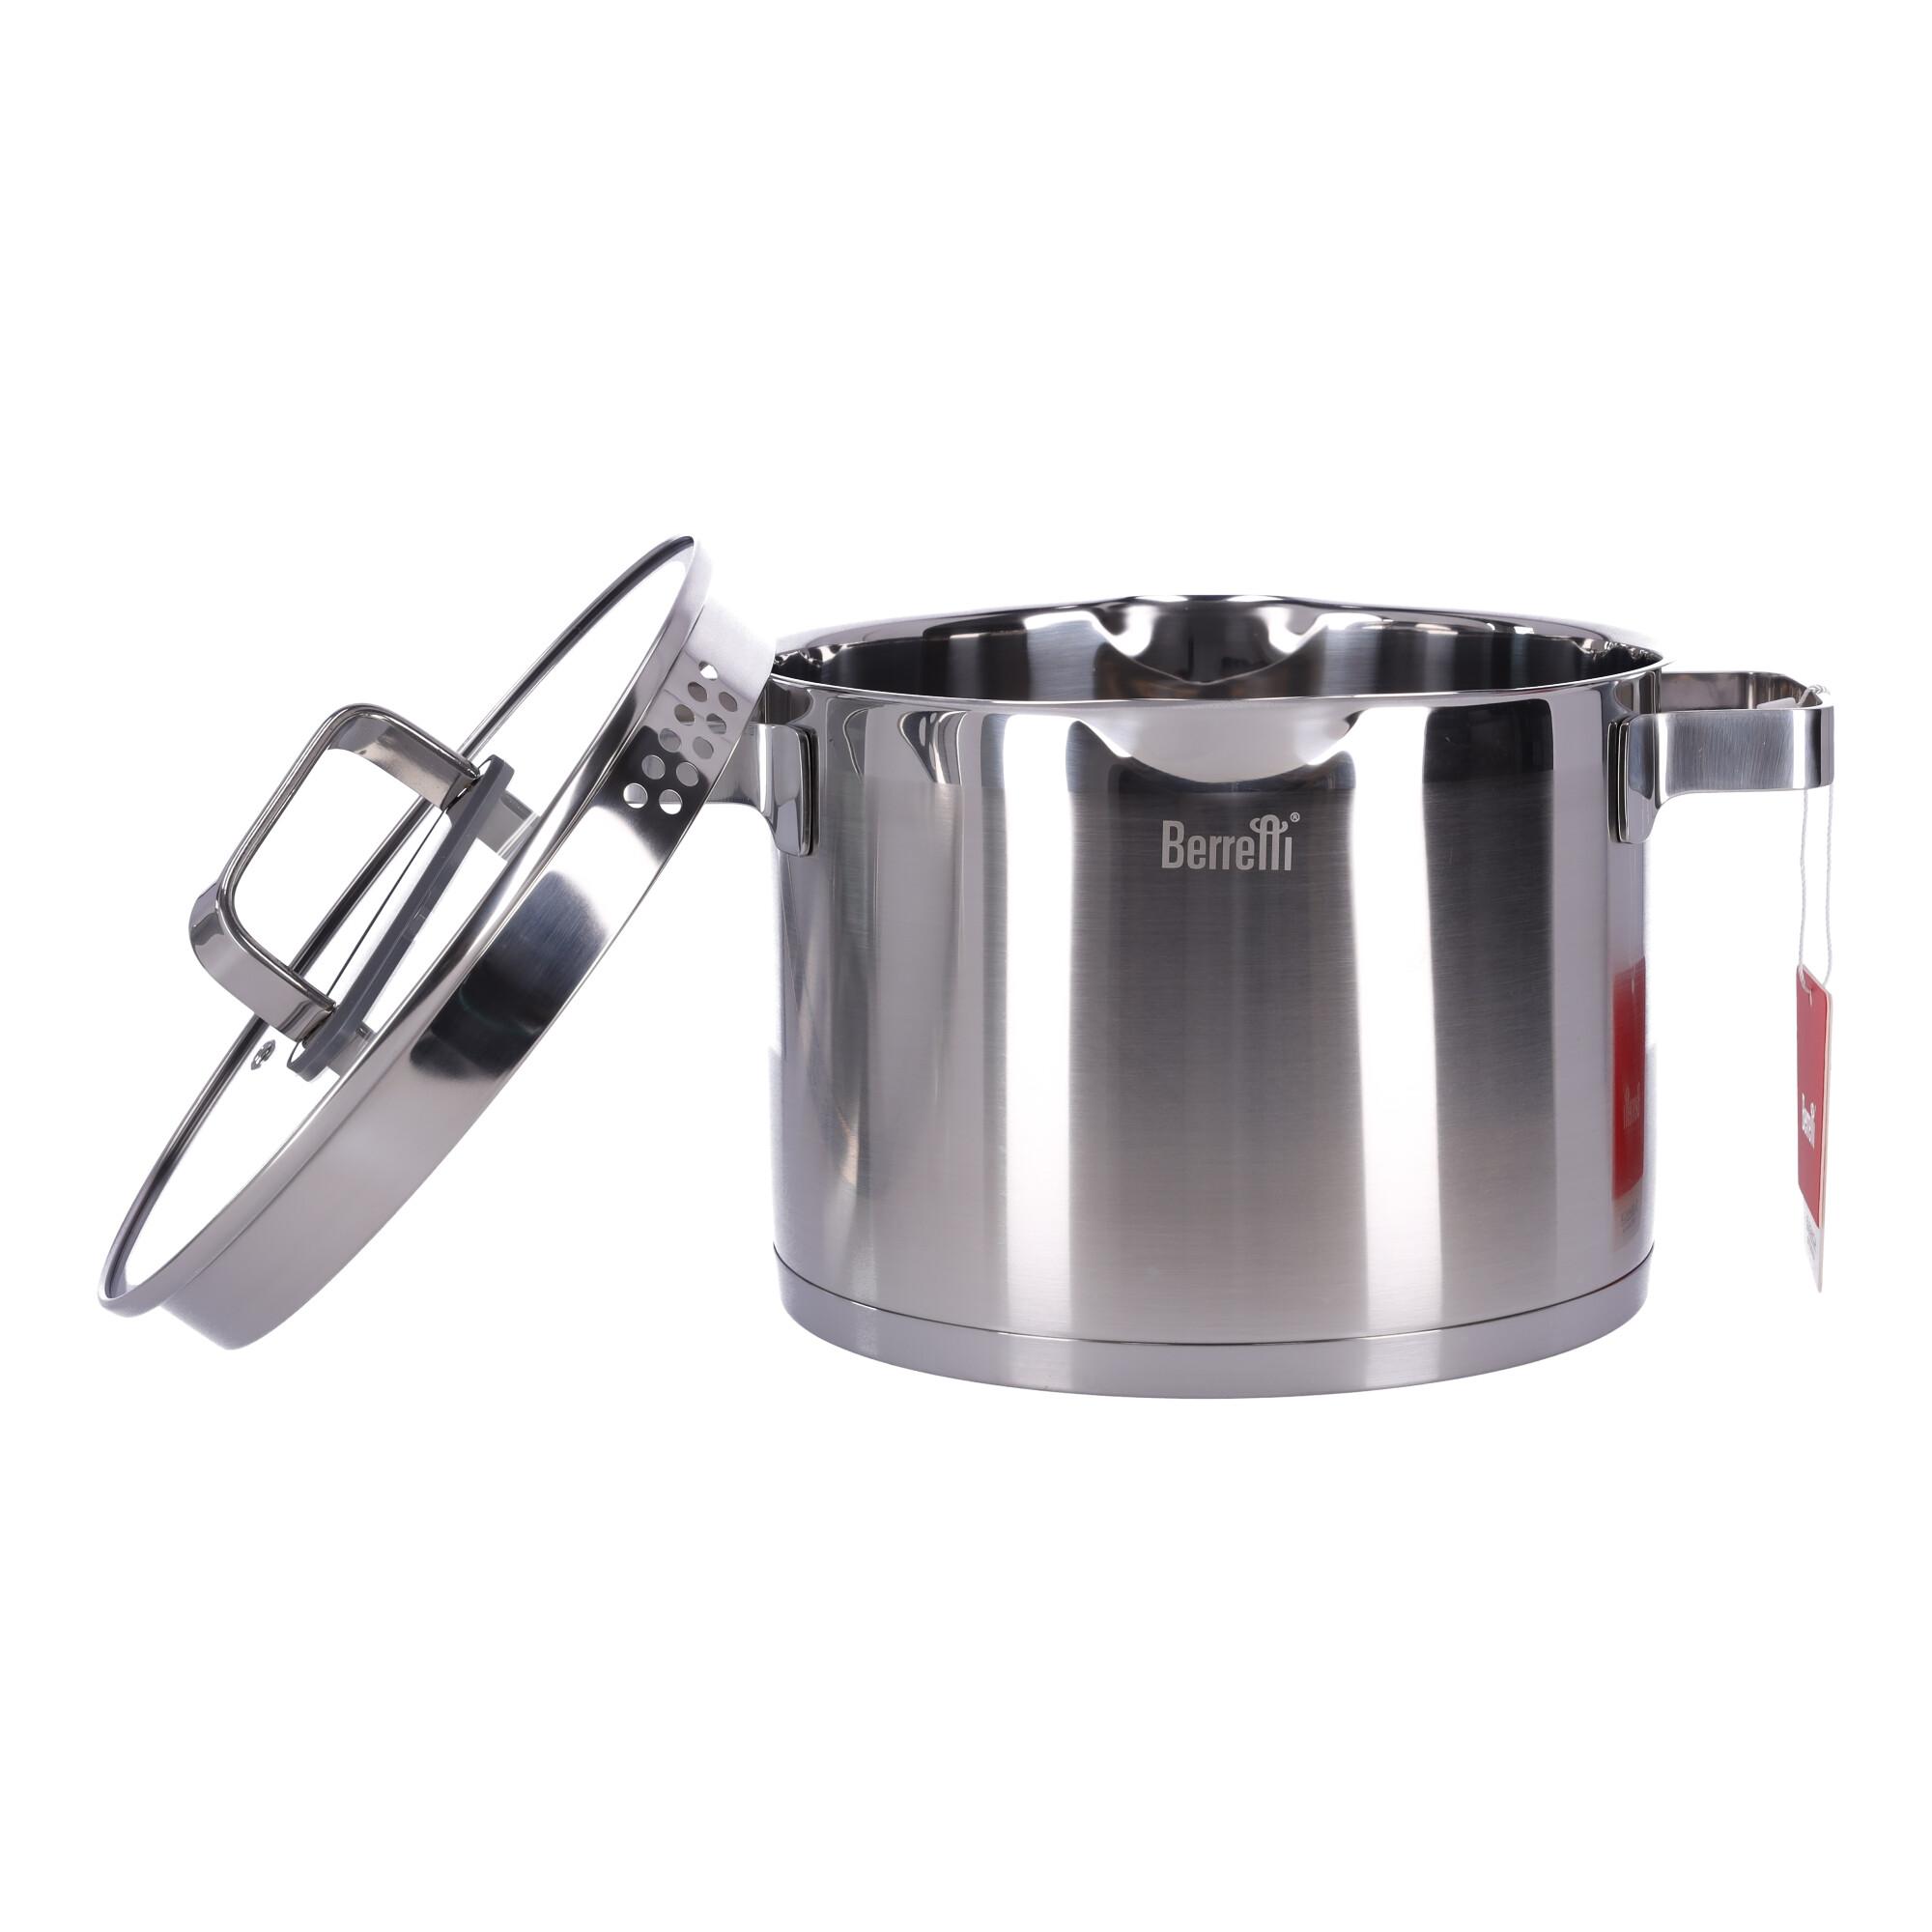 Stainless steel pot with lid Mistral BERRETTI, 22 cm